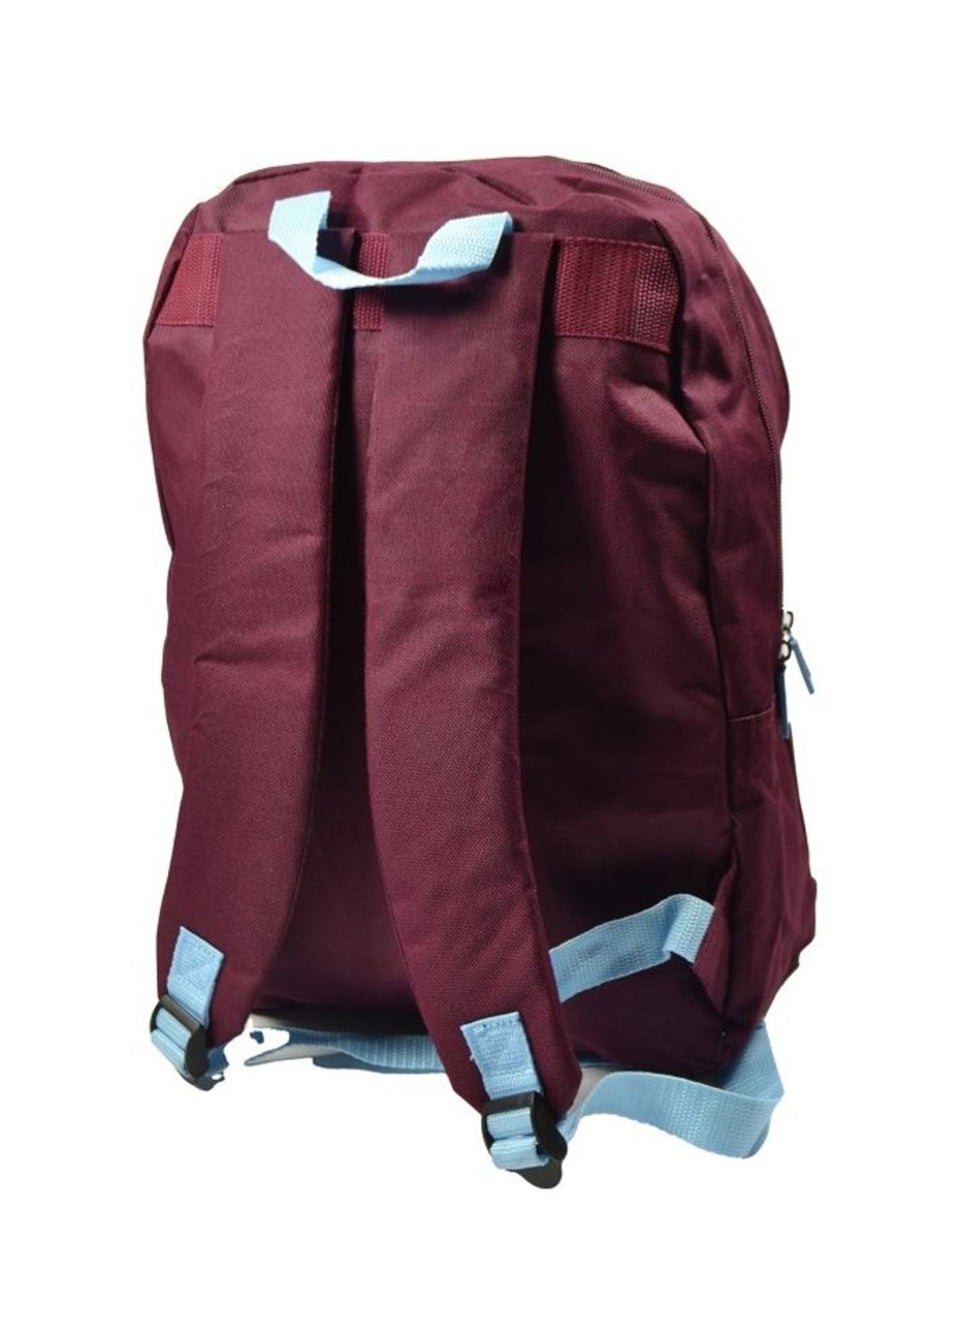 West Ham United FC Red Flash Backpack